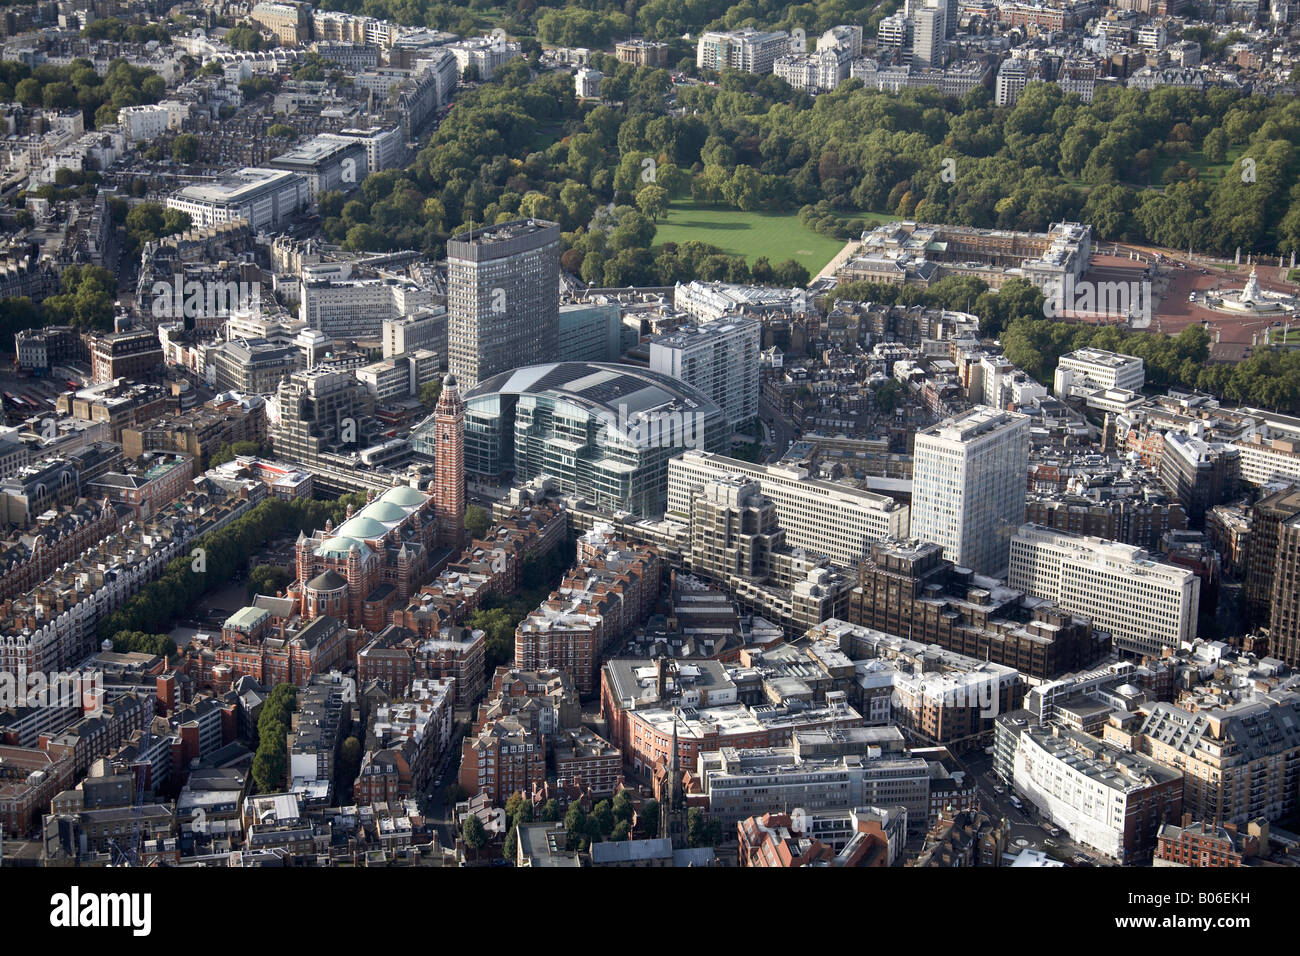 Aerial view north west of inner city buildings Westminster Cathedral Victoria Street Buckingham Palace and gardens London SW1 En Stock Photo